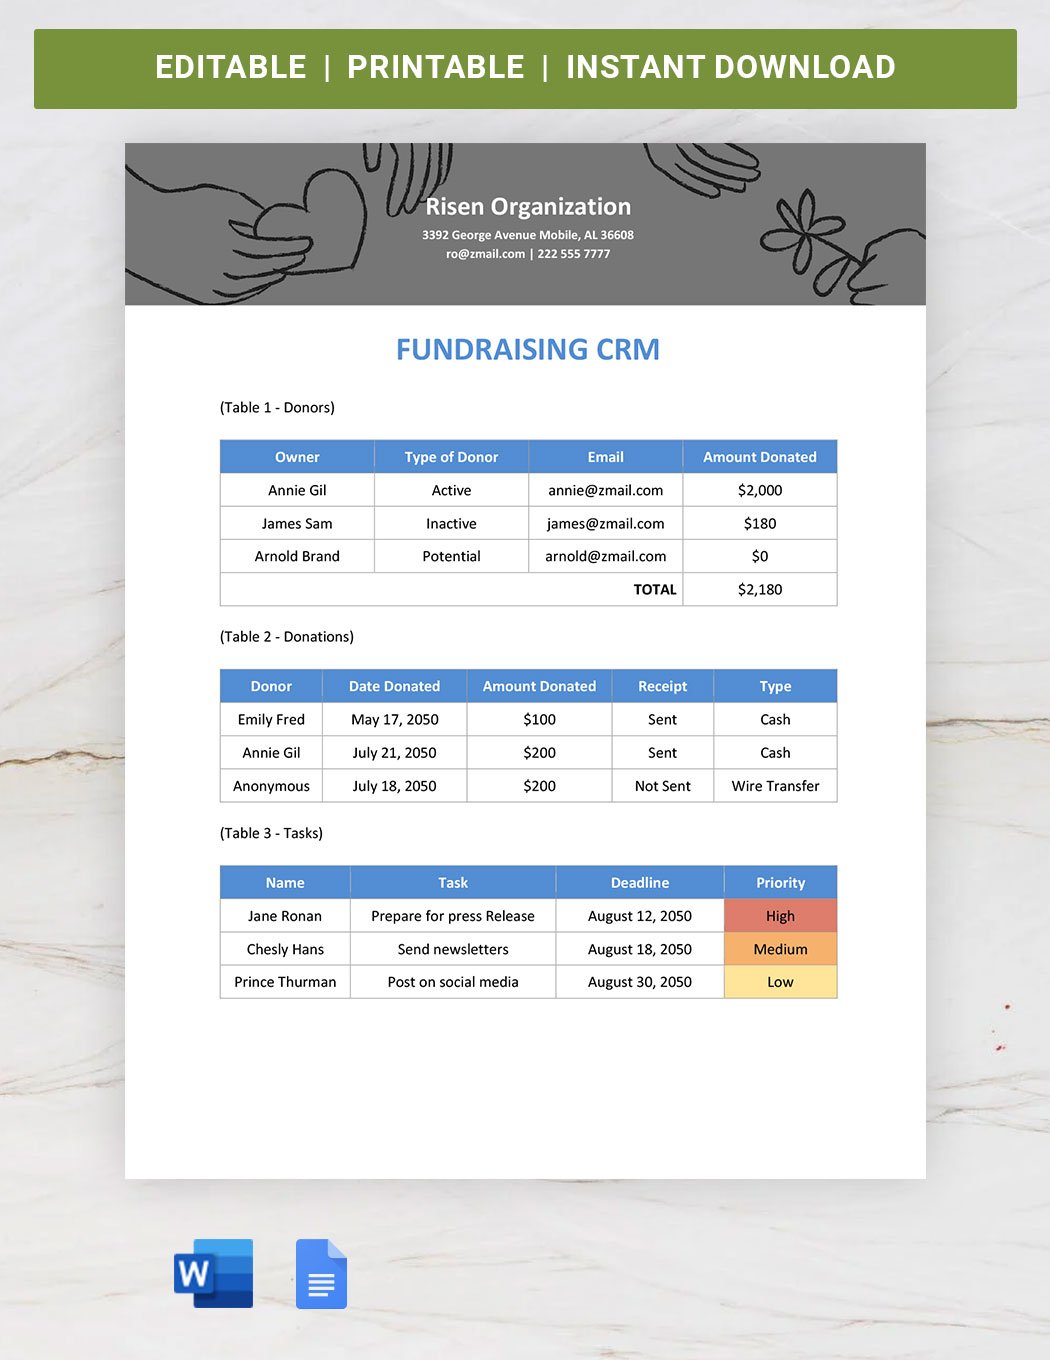 Fundraising CRM Template Download in Word, Google Docs